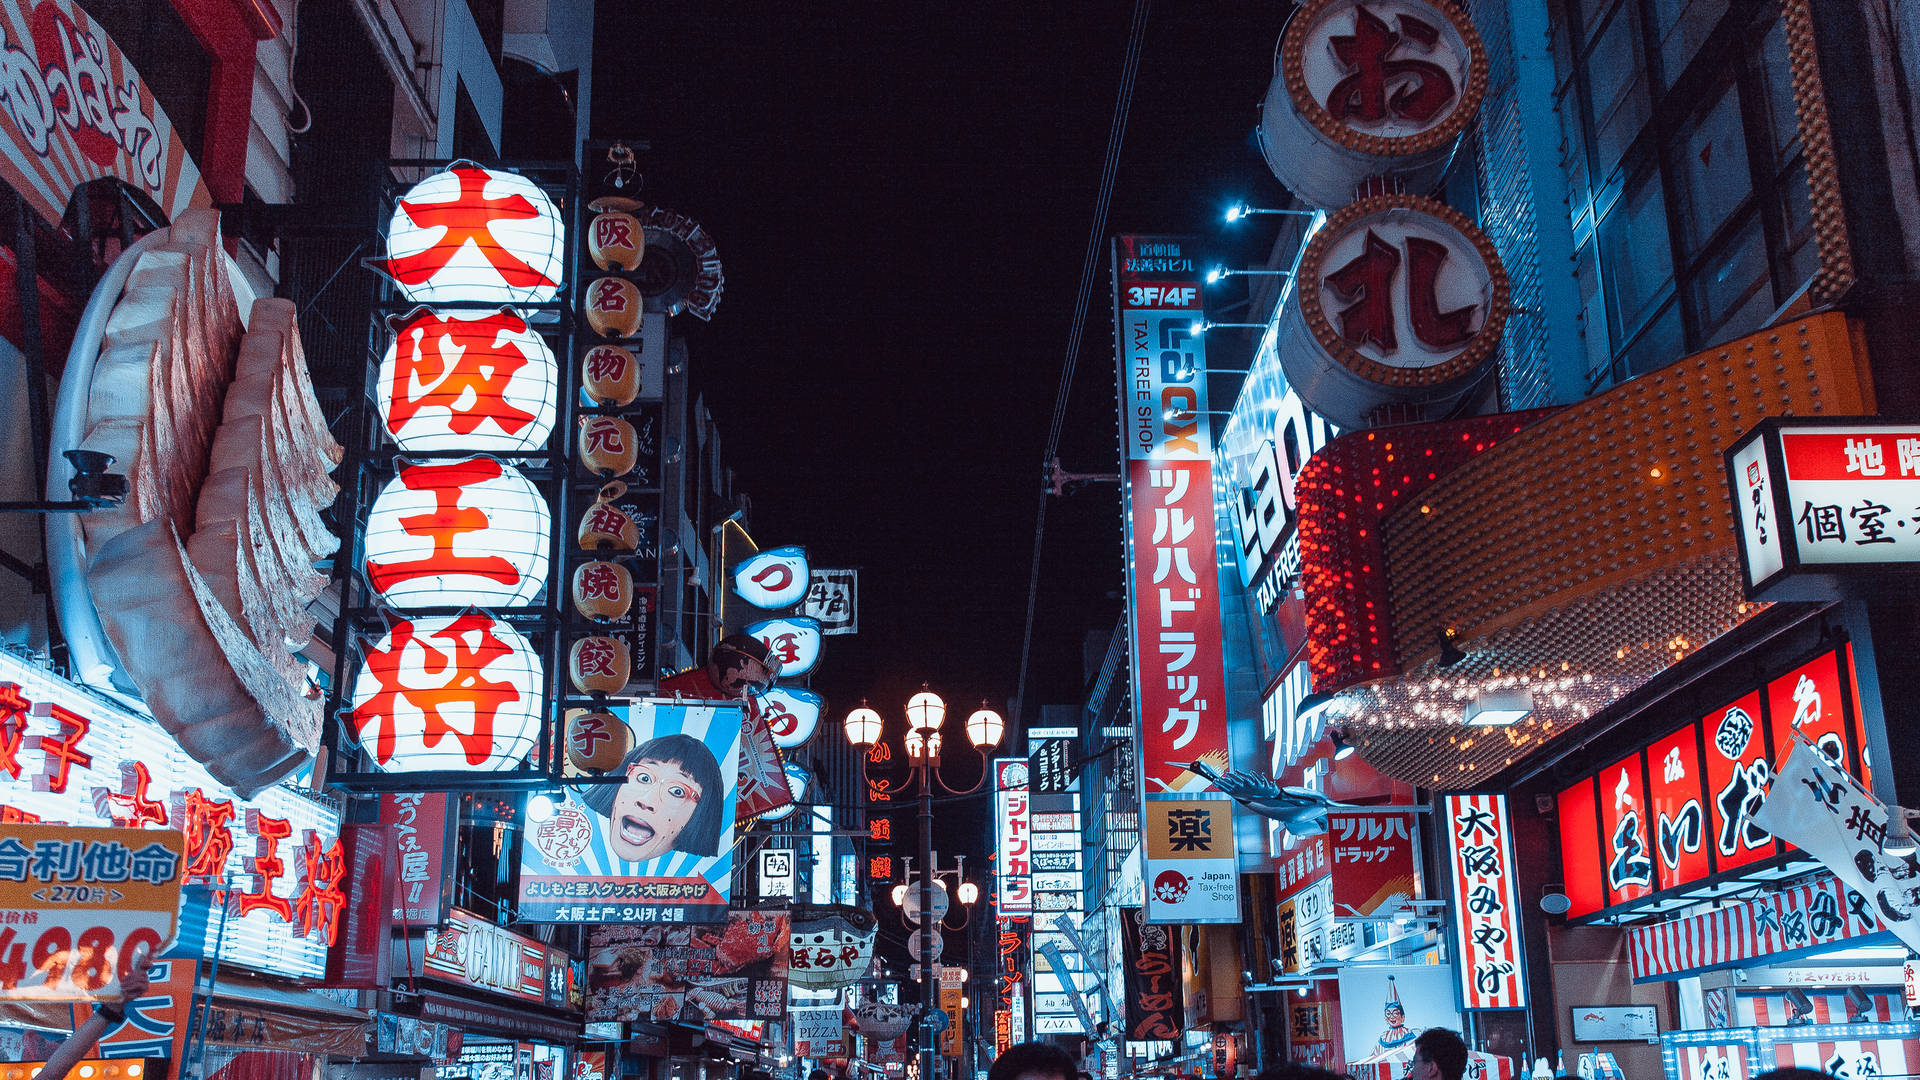 Bright Shop Signs Light Up The Nighttime Street In Tokyo, Japan Background